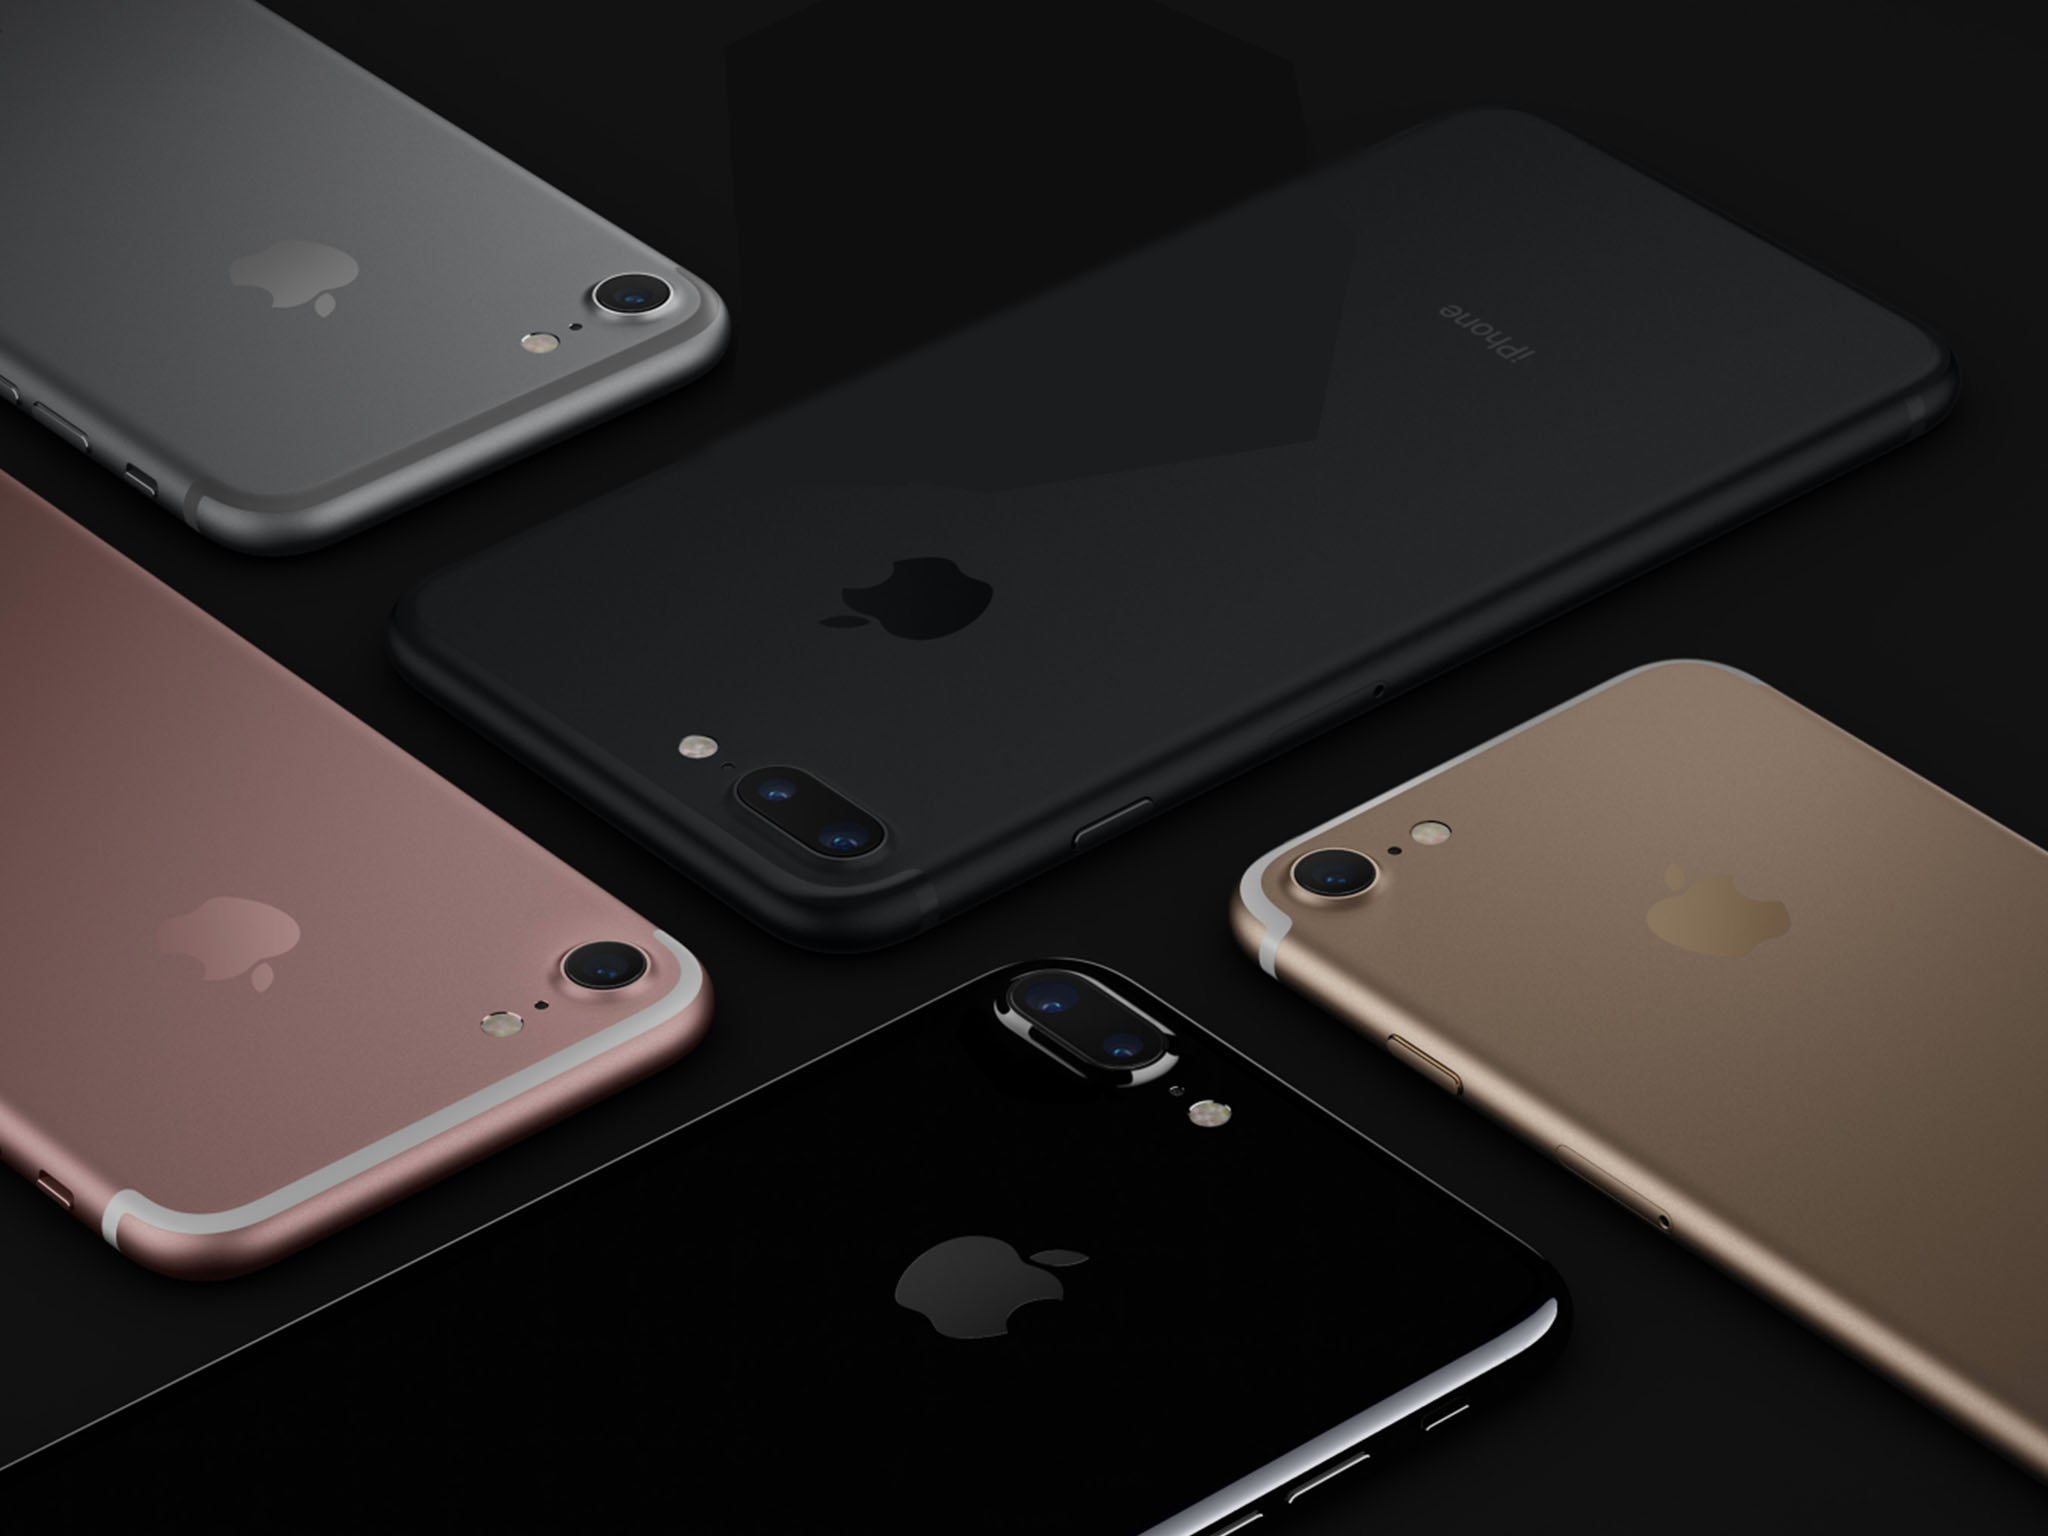 What Color Iphone 7 Should You Get Silver Gold Rose Gold Black Jet Black Or Product Red Imore